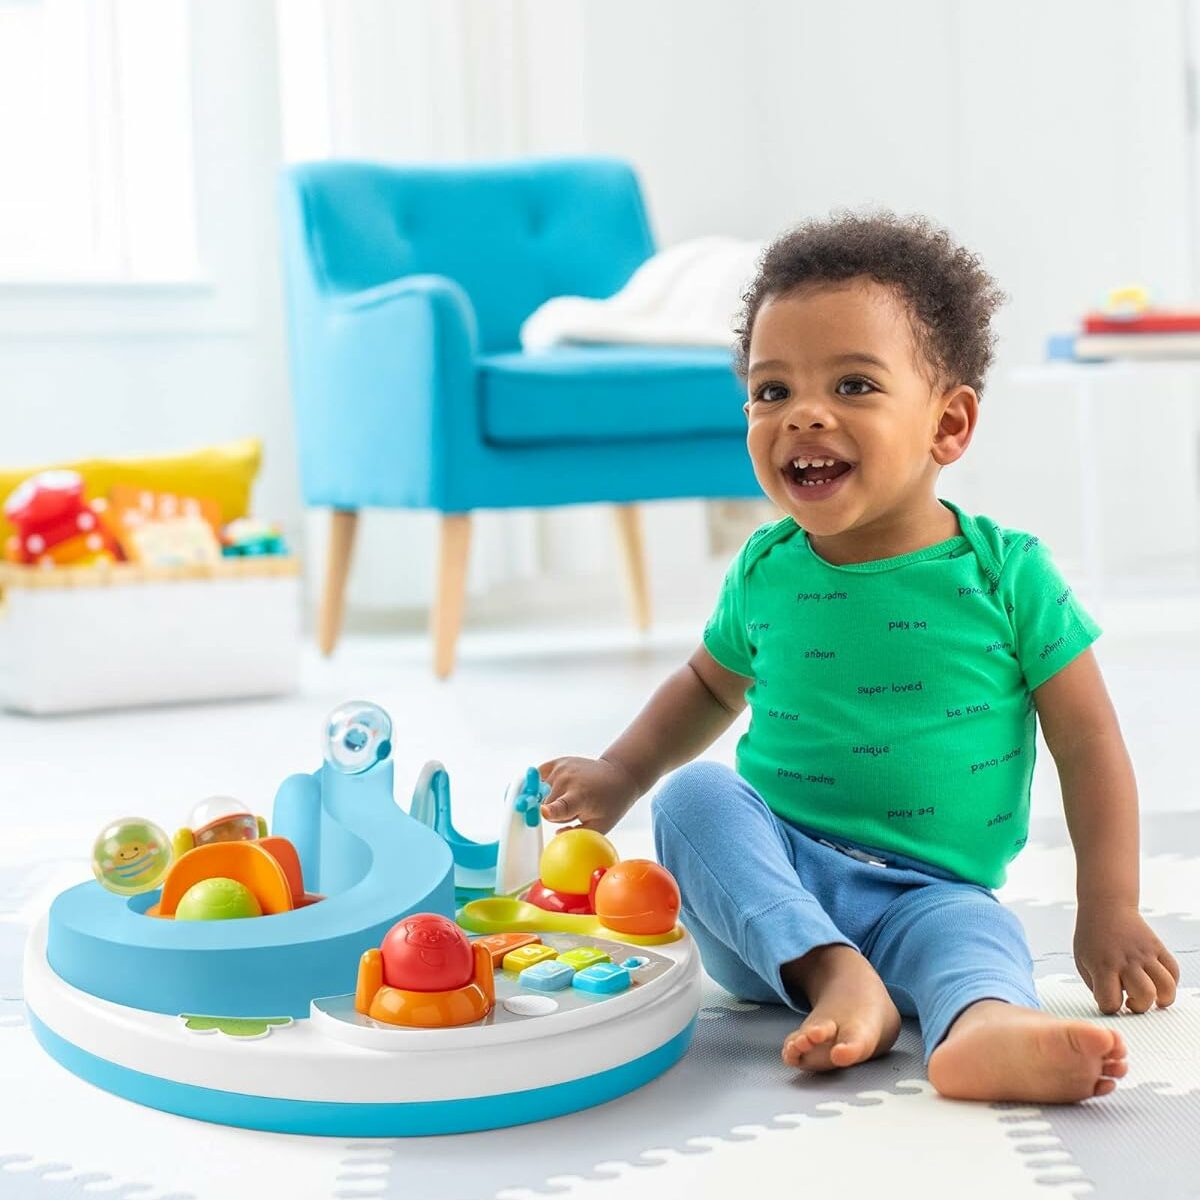 Skip Hop activity table is a favorite toy for 1-year-olds